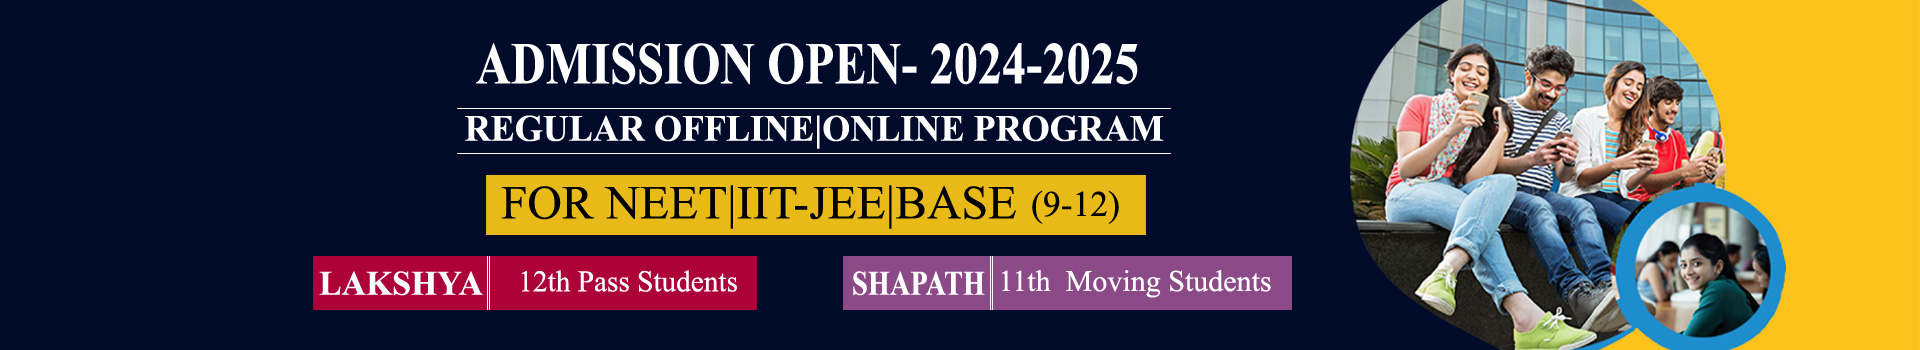 admission-open-2023-24